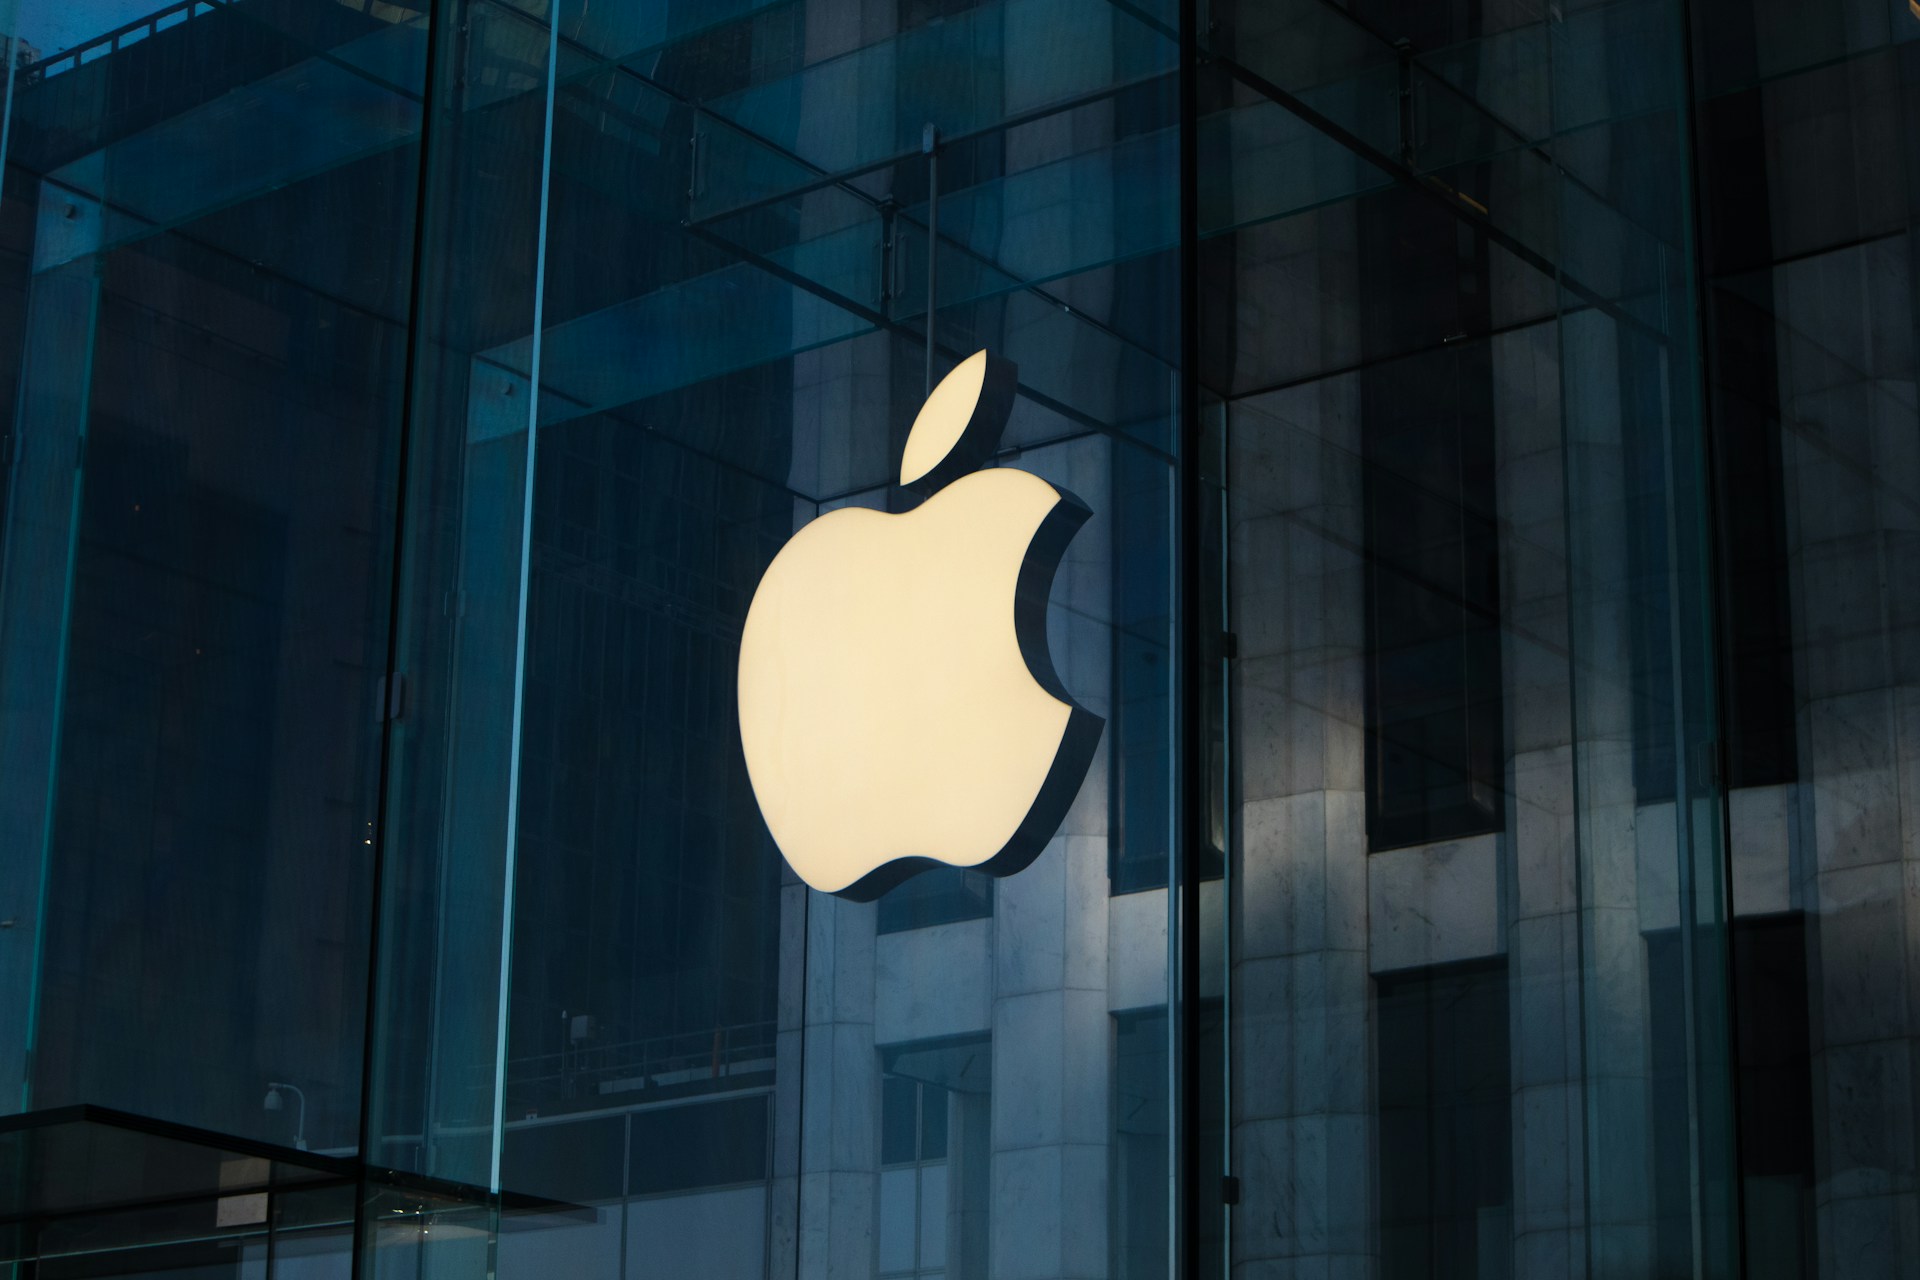 Apple Users in Europe Can Now Download Apps from Third-Party Web Platforms